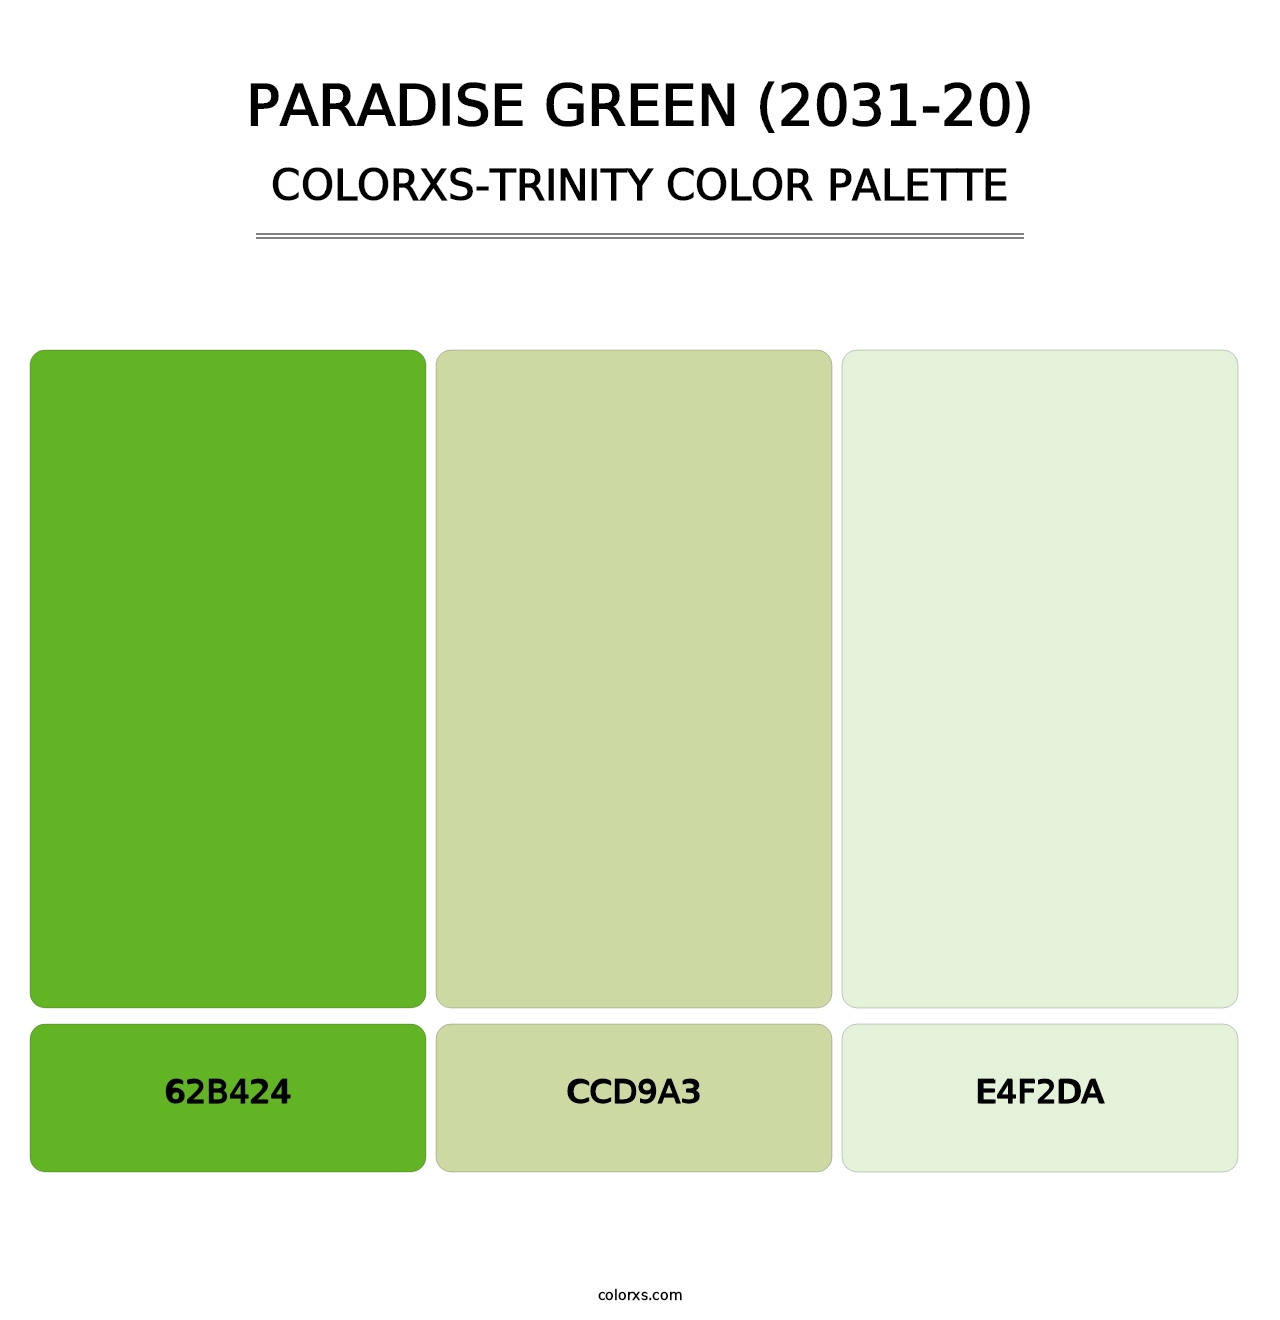 Paradise Green (2031-20) - Colorxs Trinity Palette